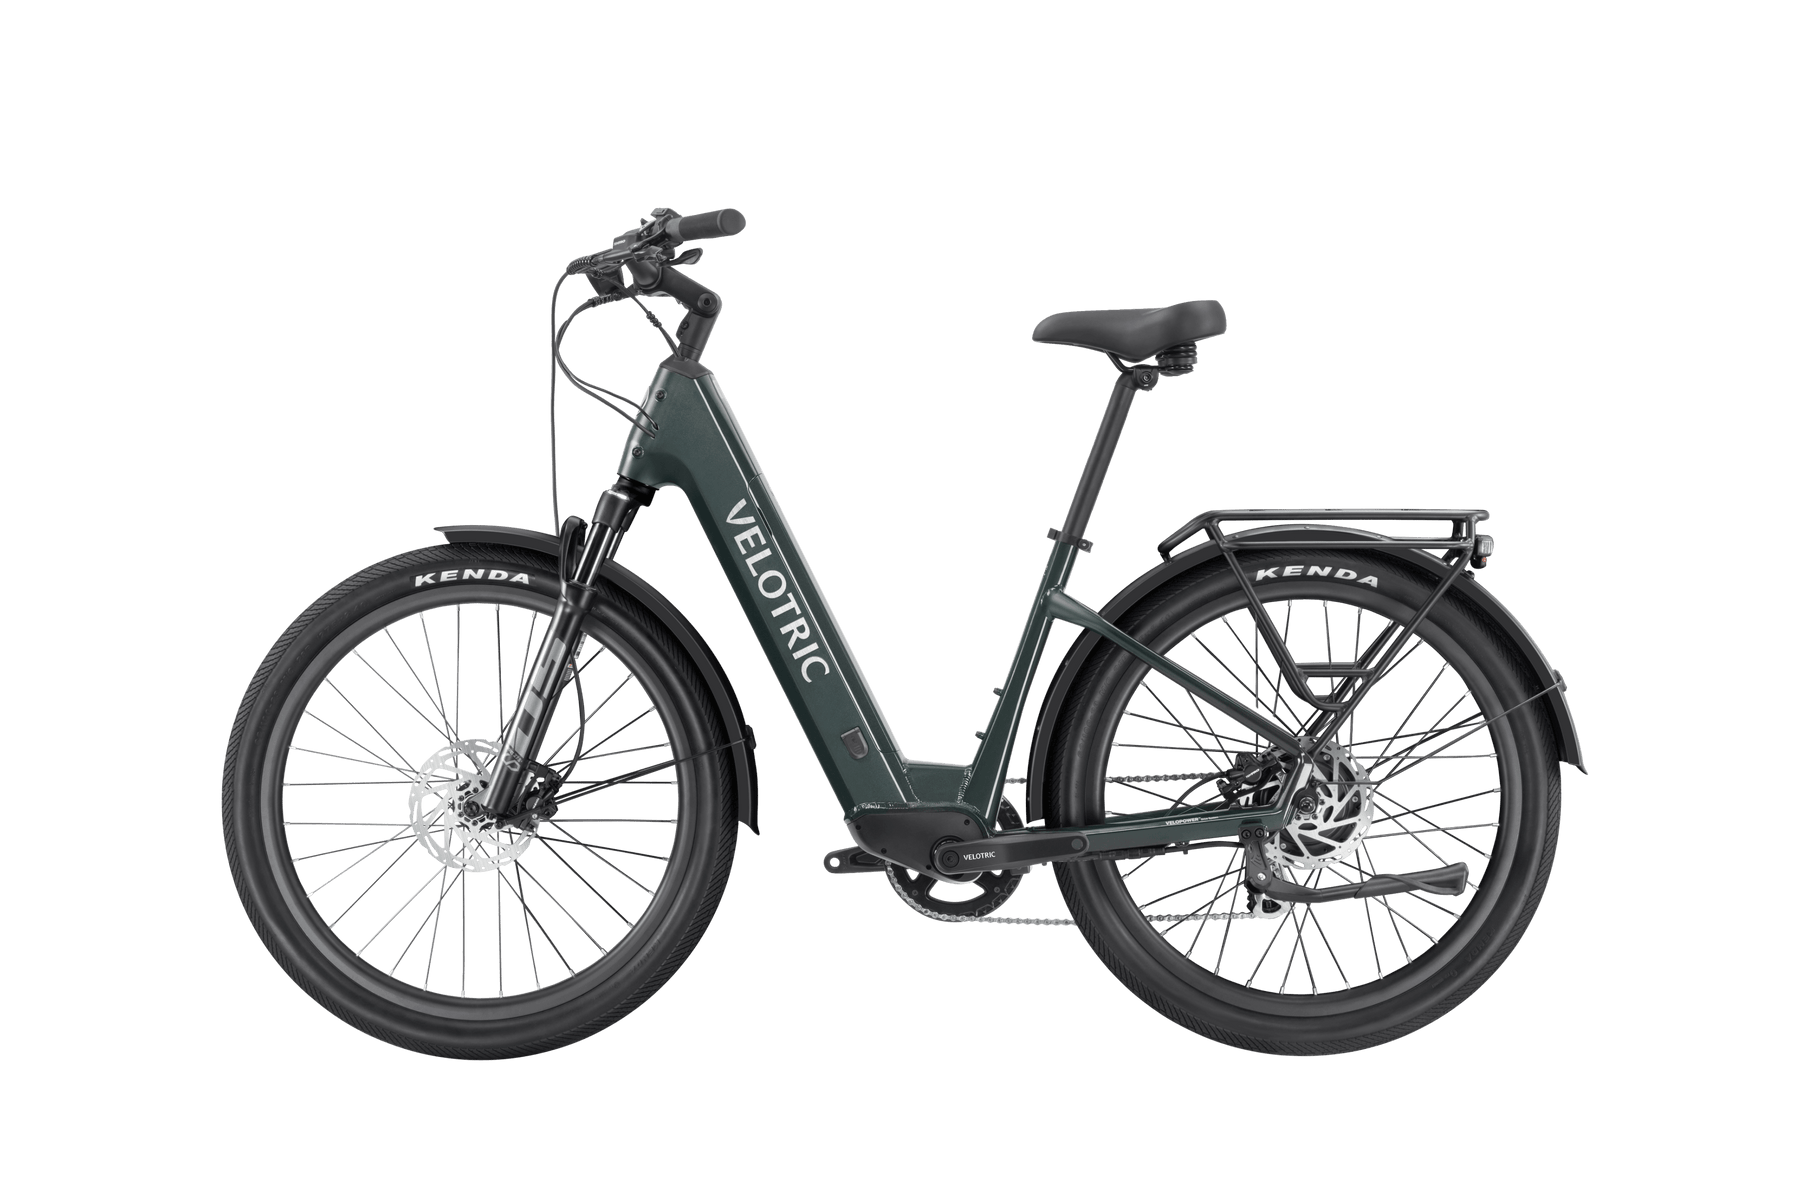 A black electric bicycle with the product "Velotric - Discover 2" displayed on the frame, featuring a step-through design and equipped with Kenda tires.